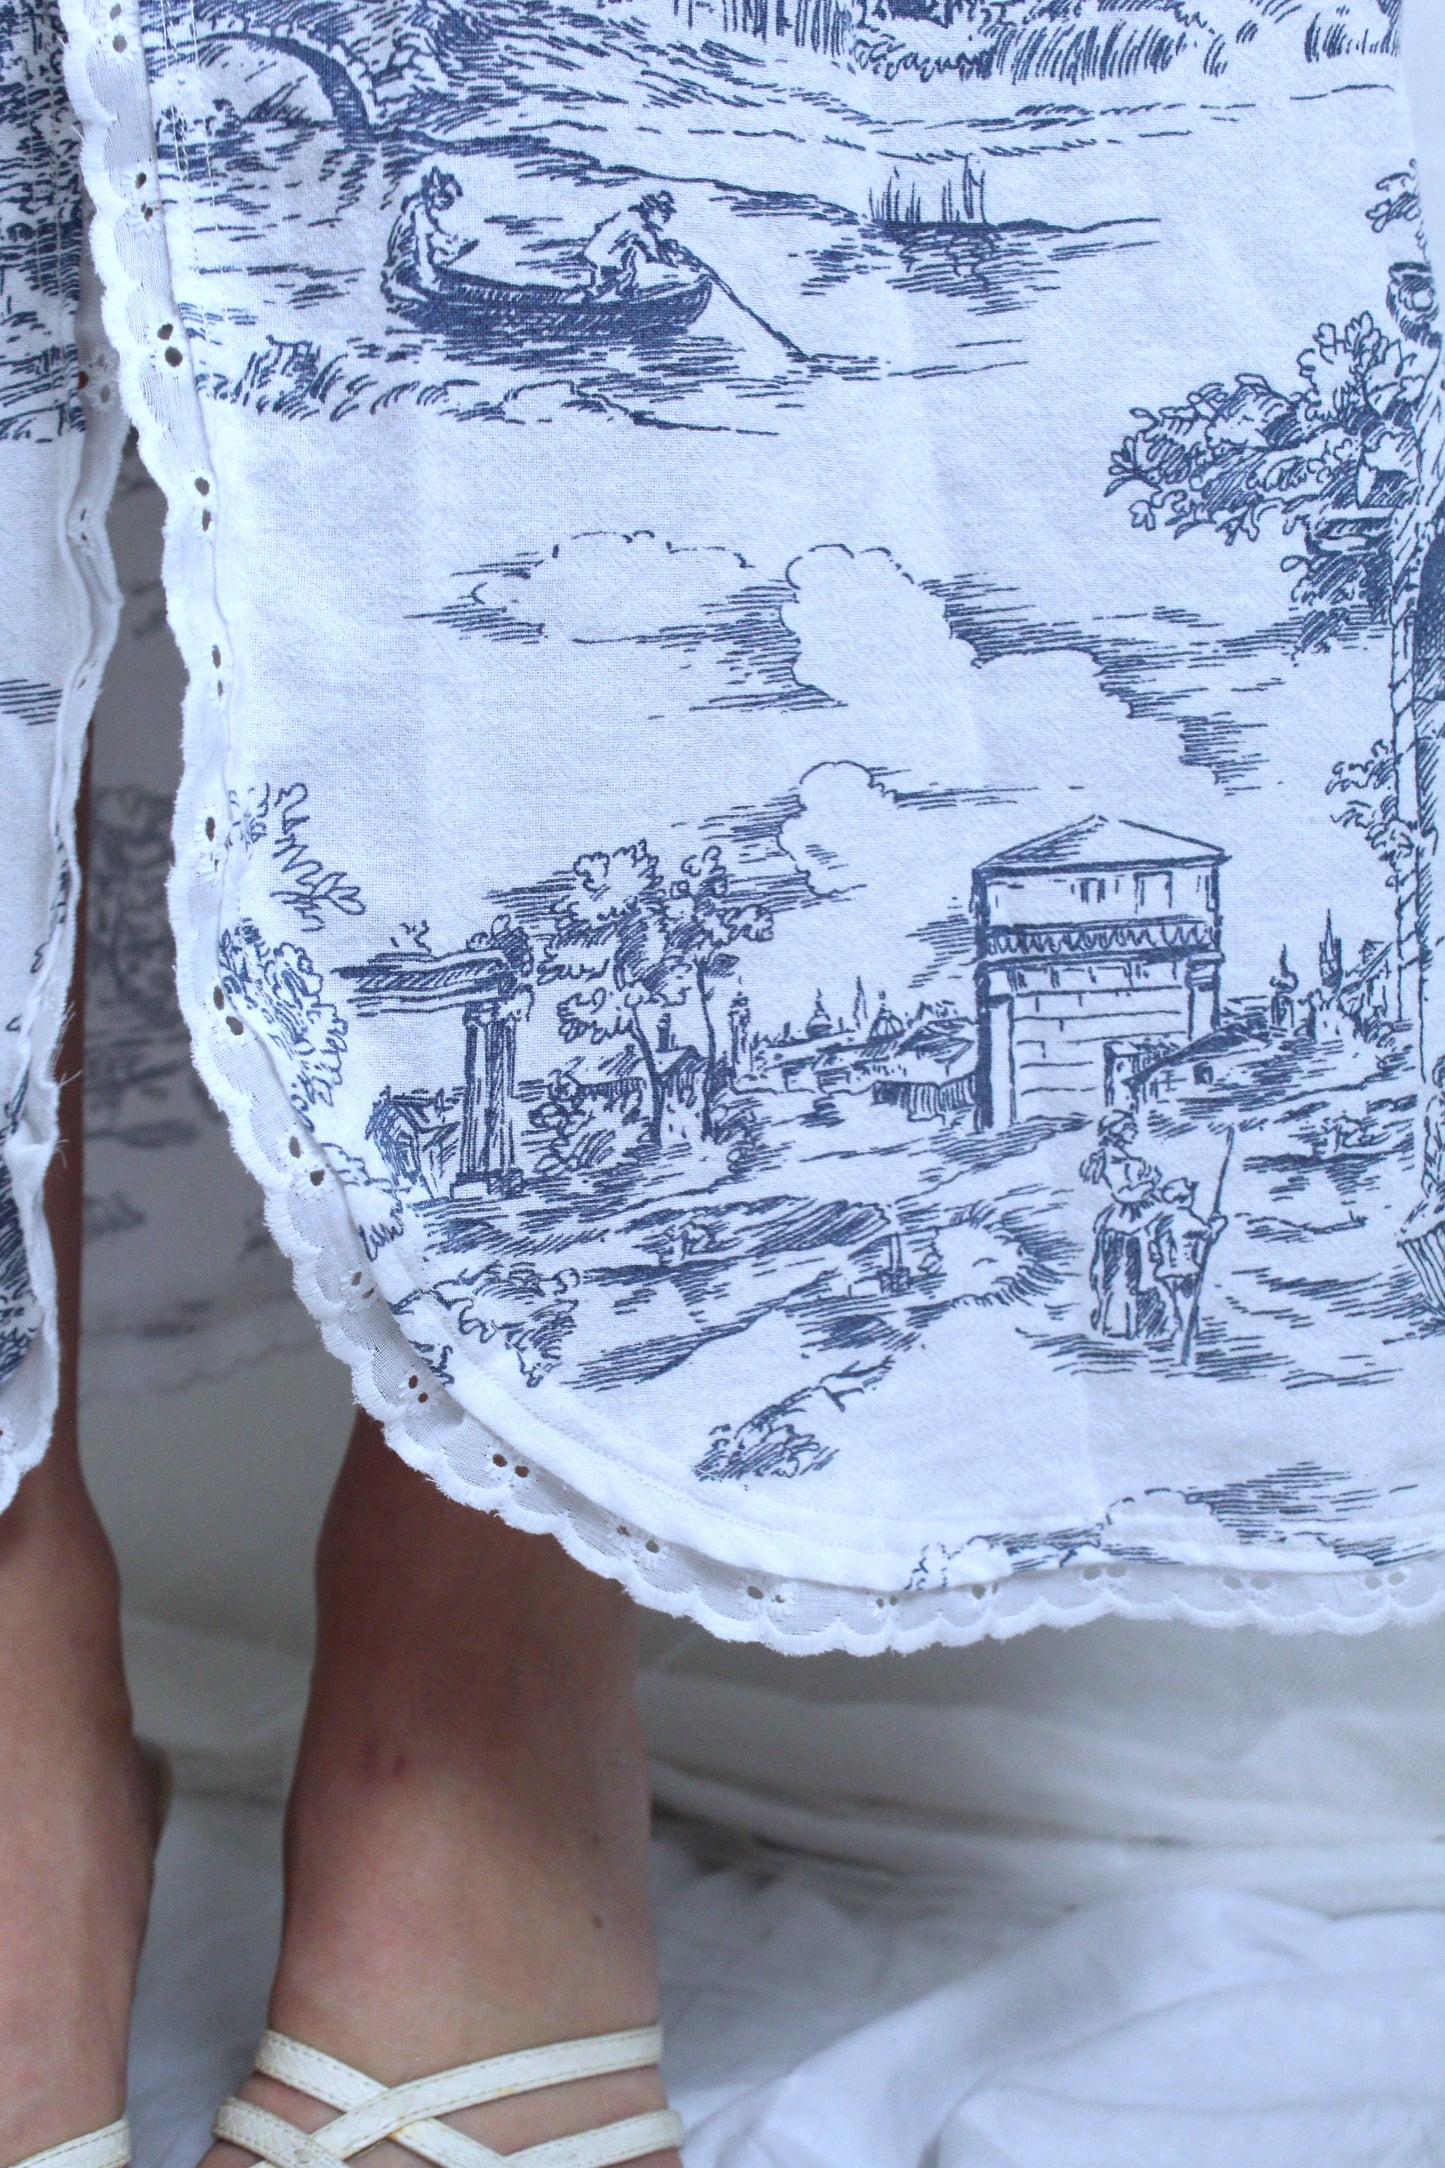 The Toile Dress